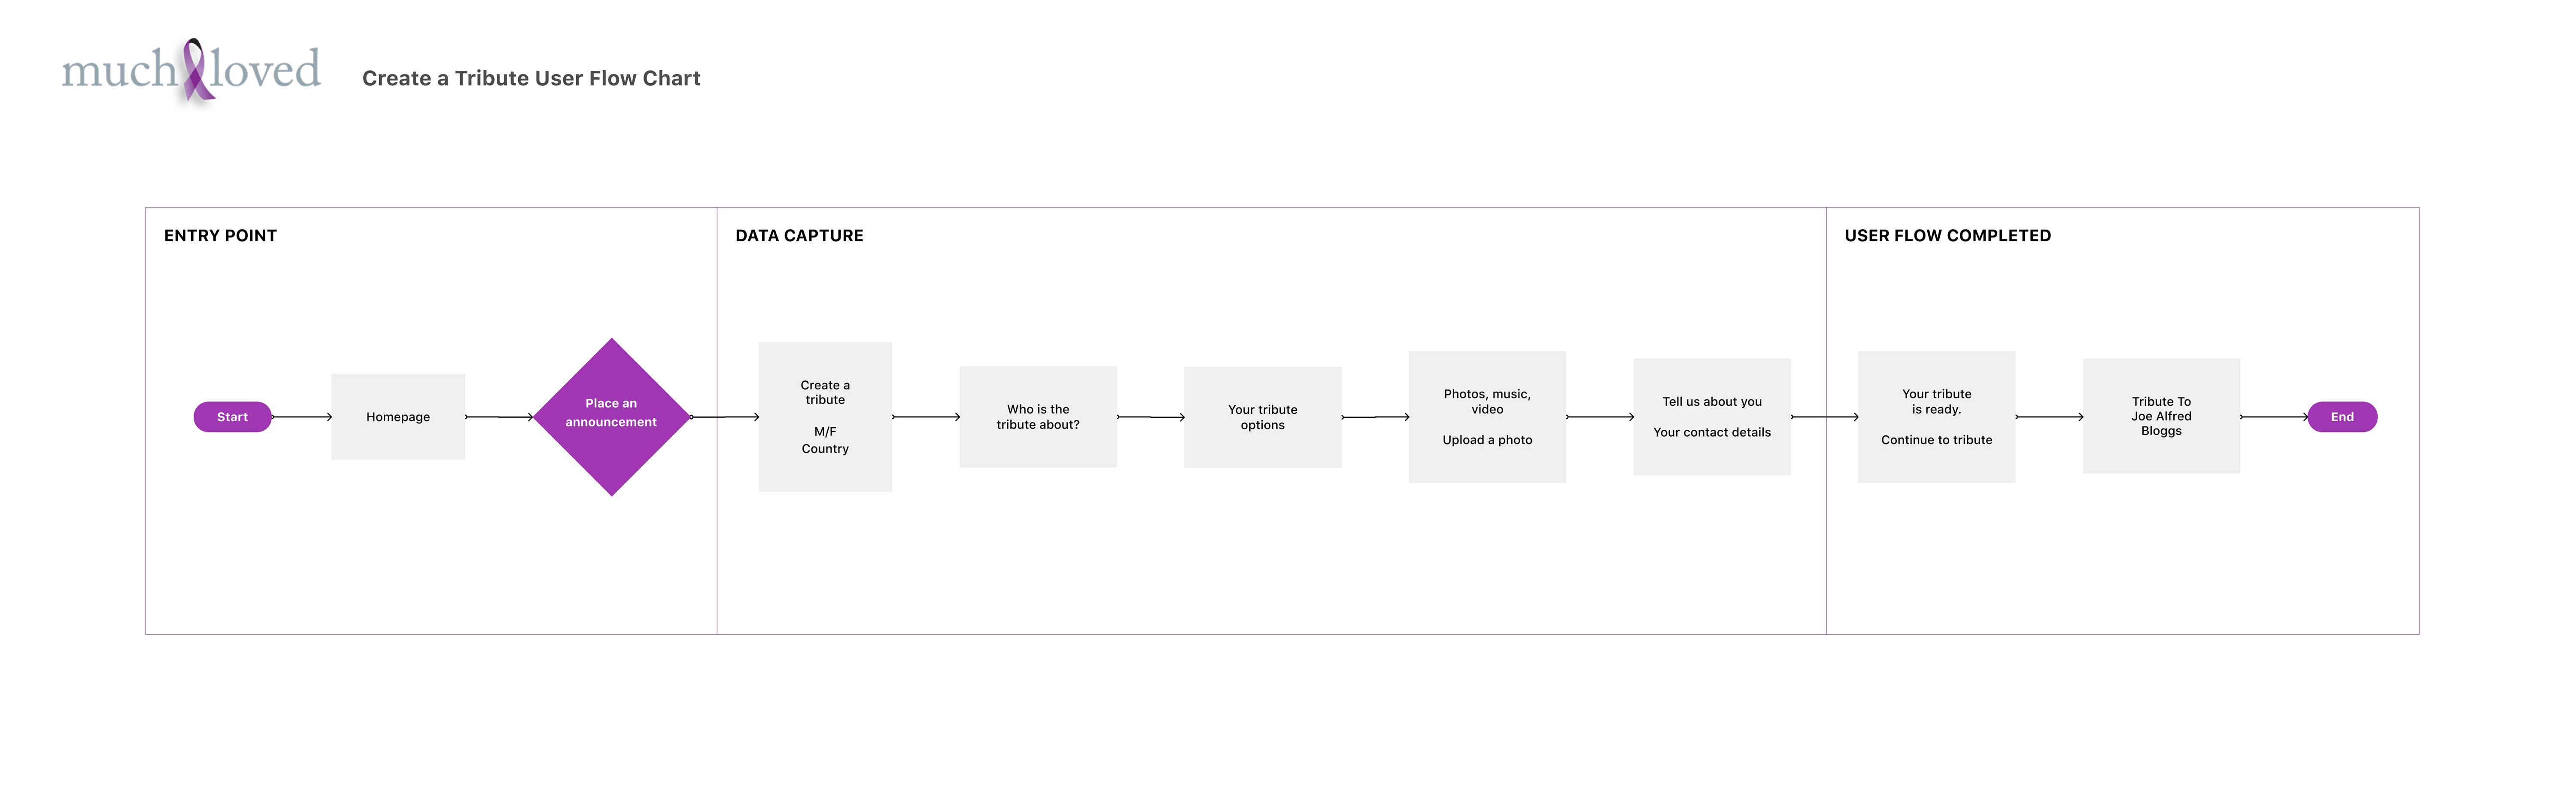 An image of the Much Loved user flow